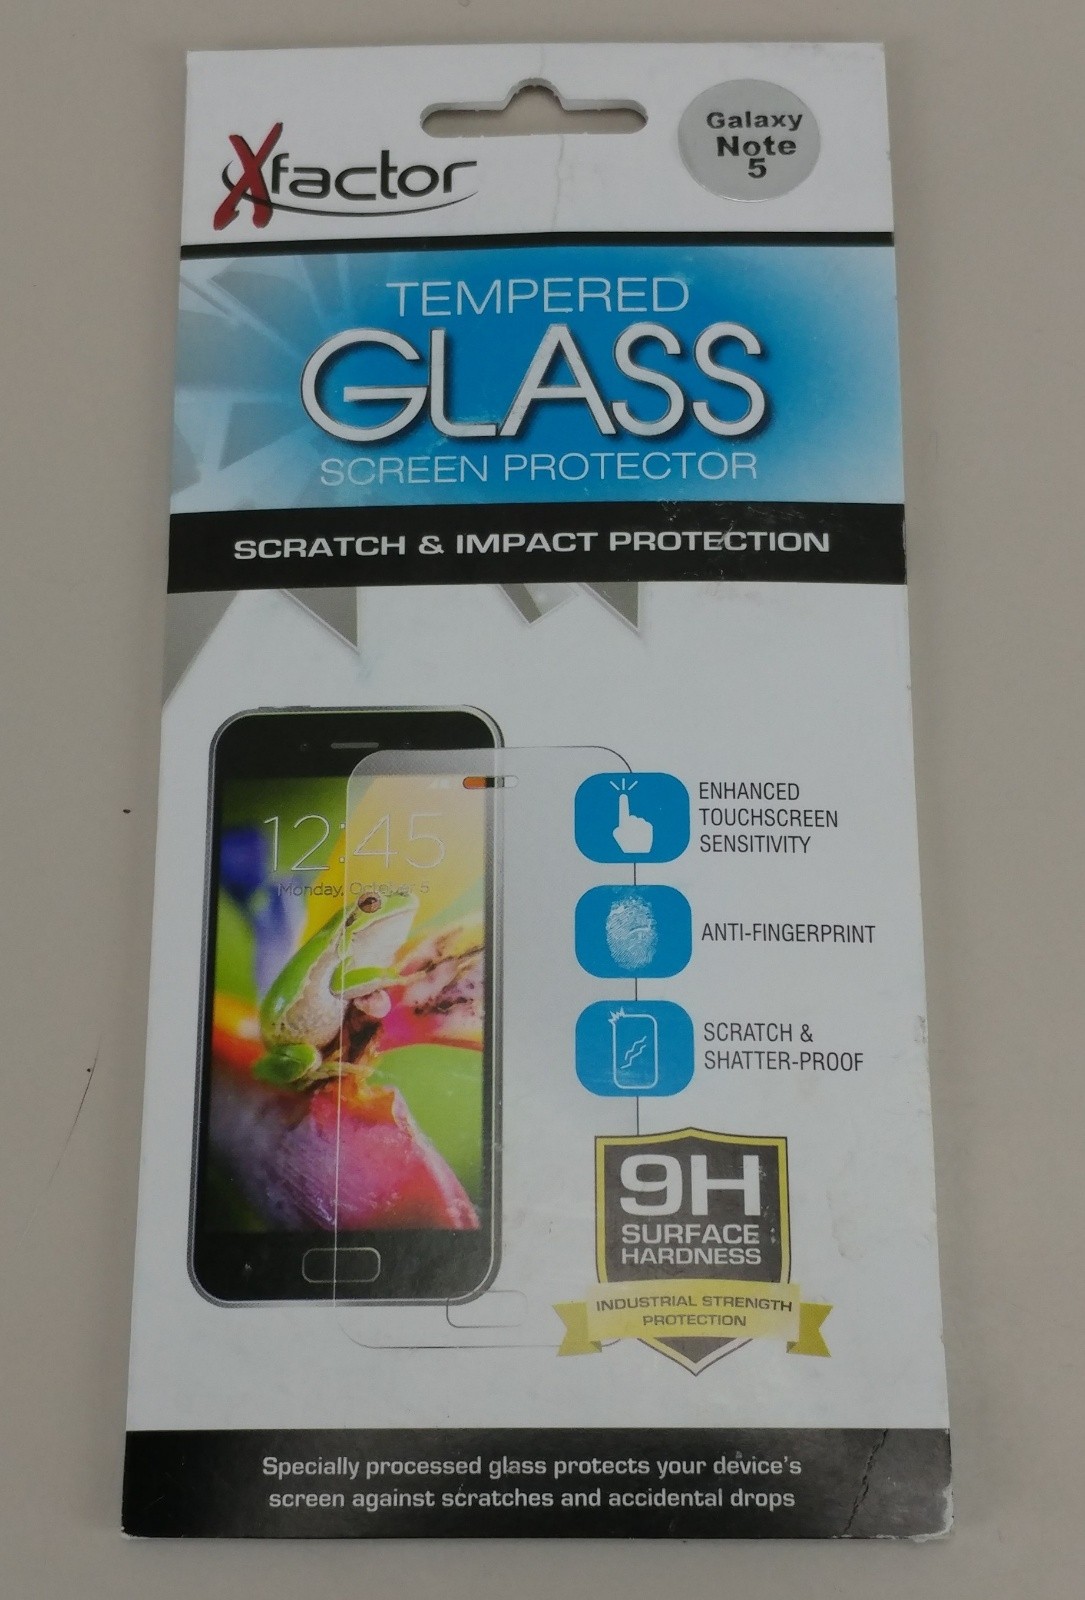 Xfactor Tempered Glass Screen Protector - Samsung Note 5 TEMPXFNOTE5